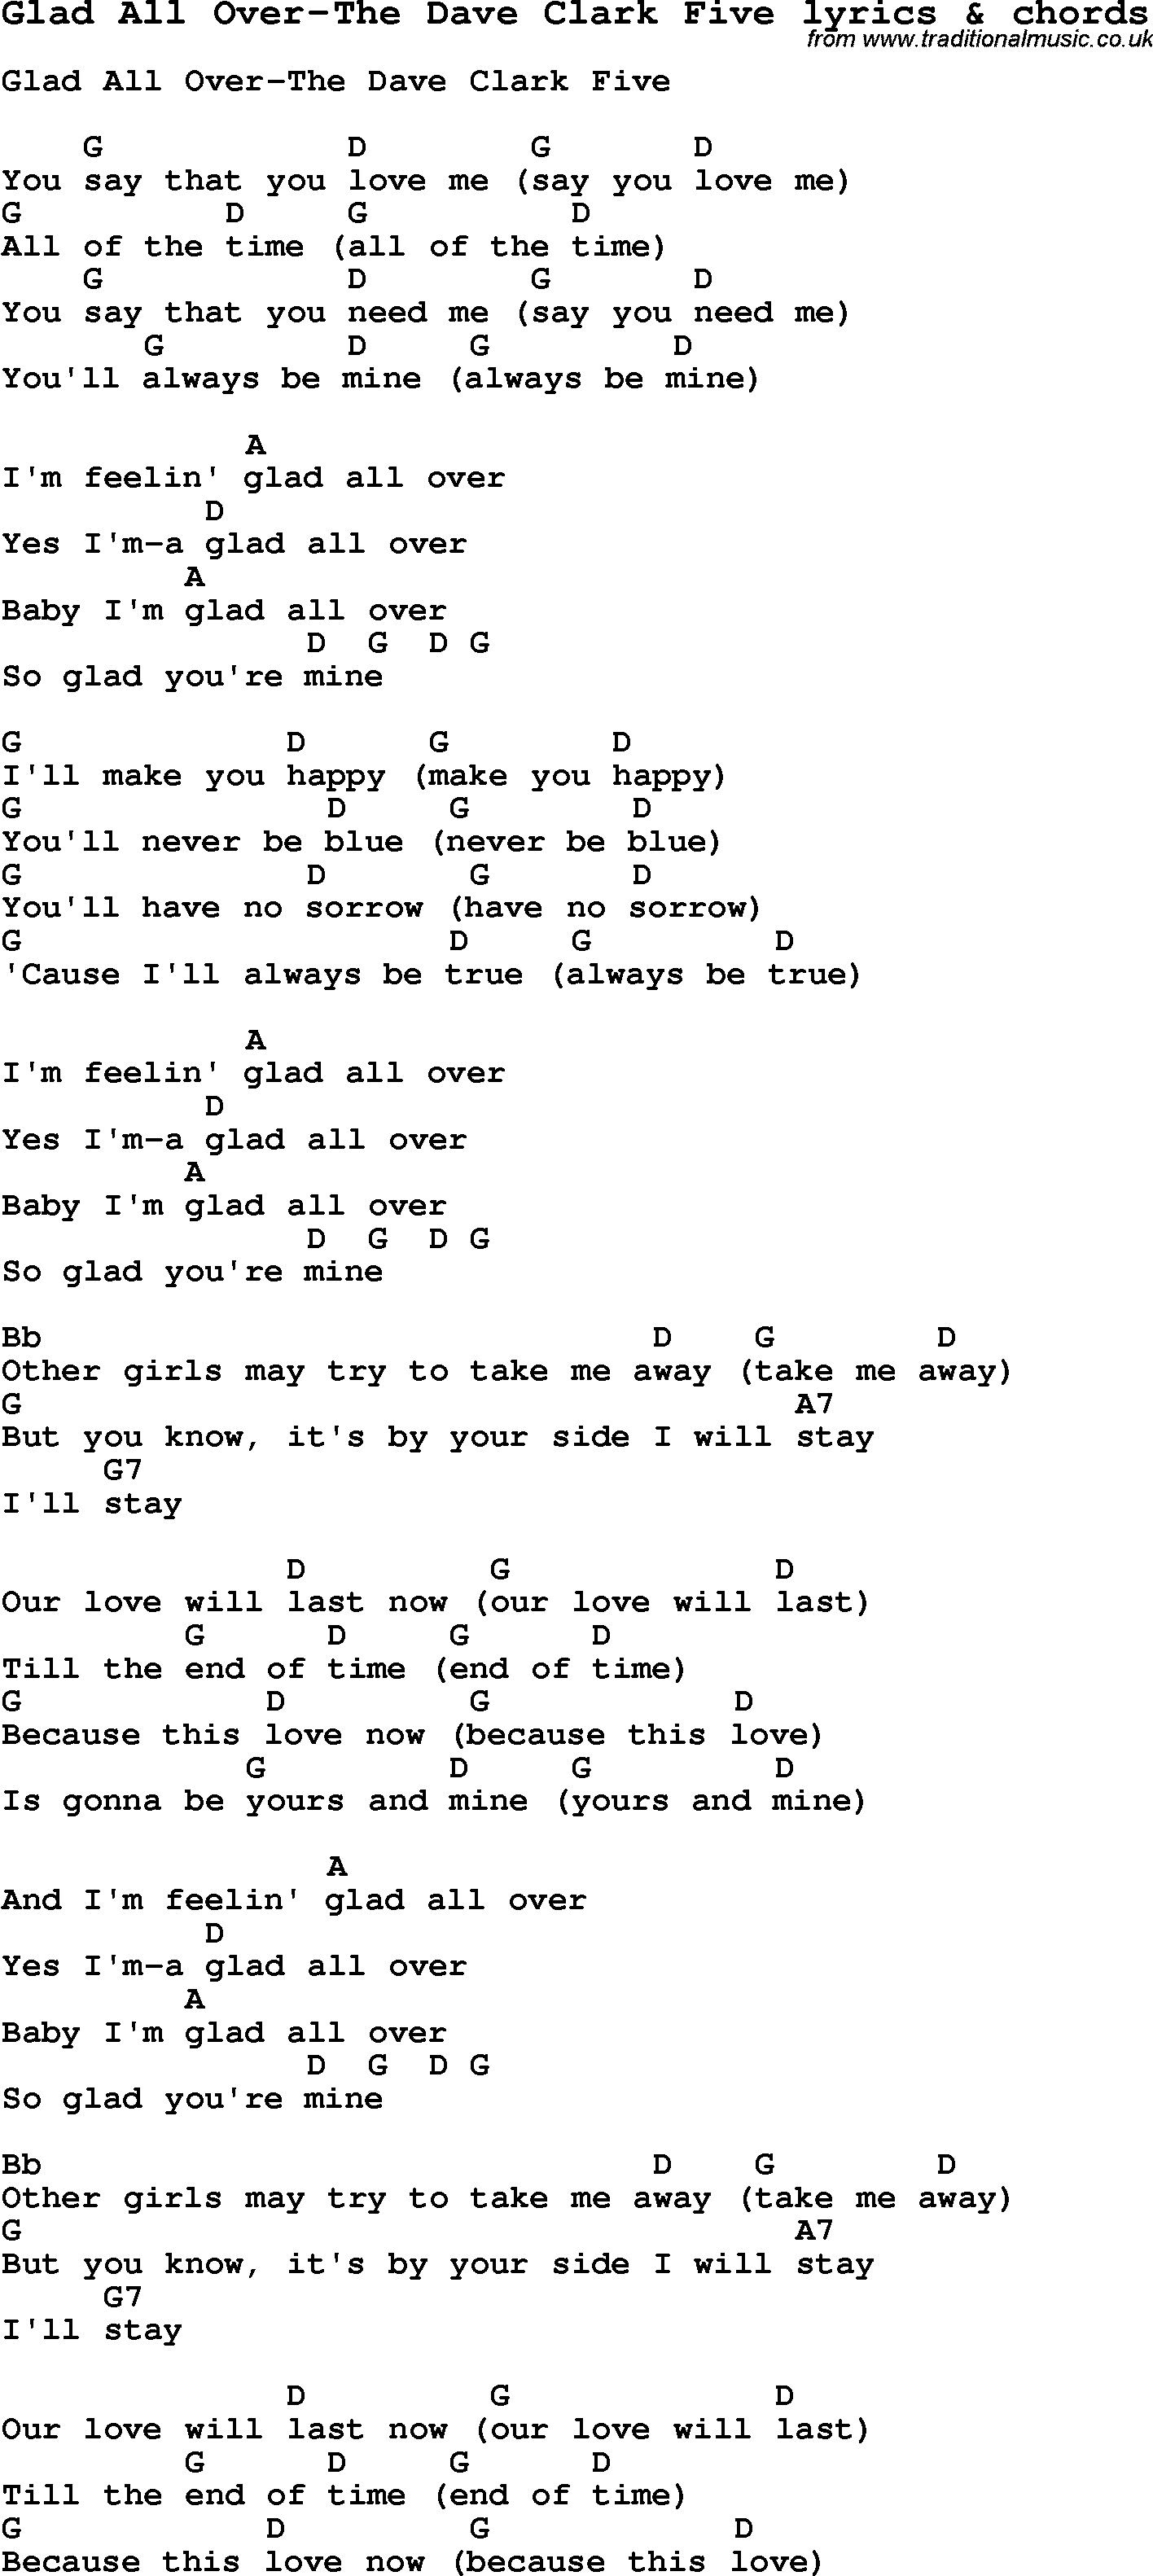 Love Song Lyrics for: Glad All Over-The Dave Clark Five with chords for Ukulele, Guitar Banjo etc.